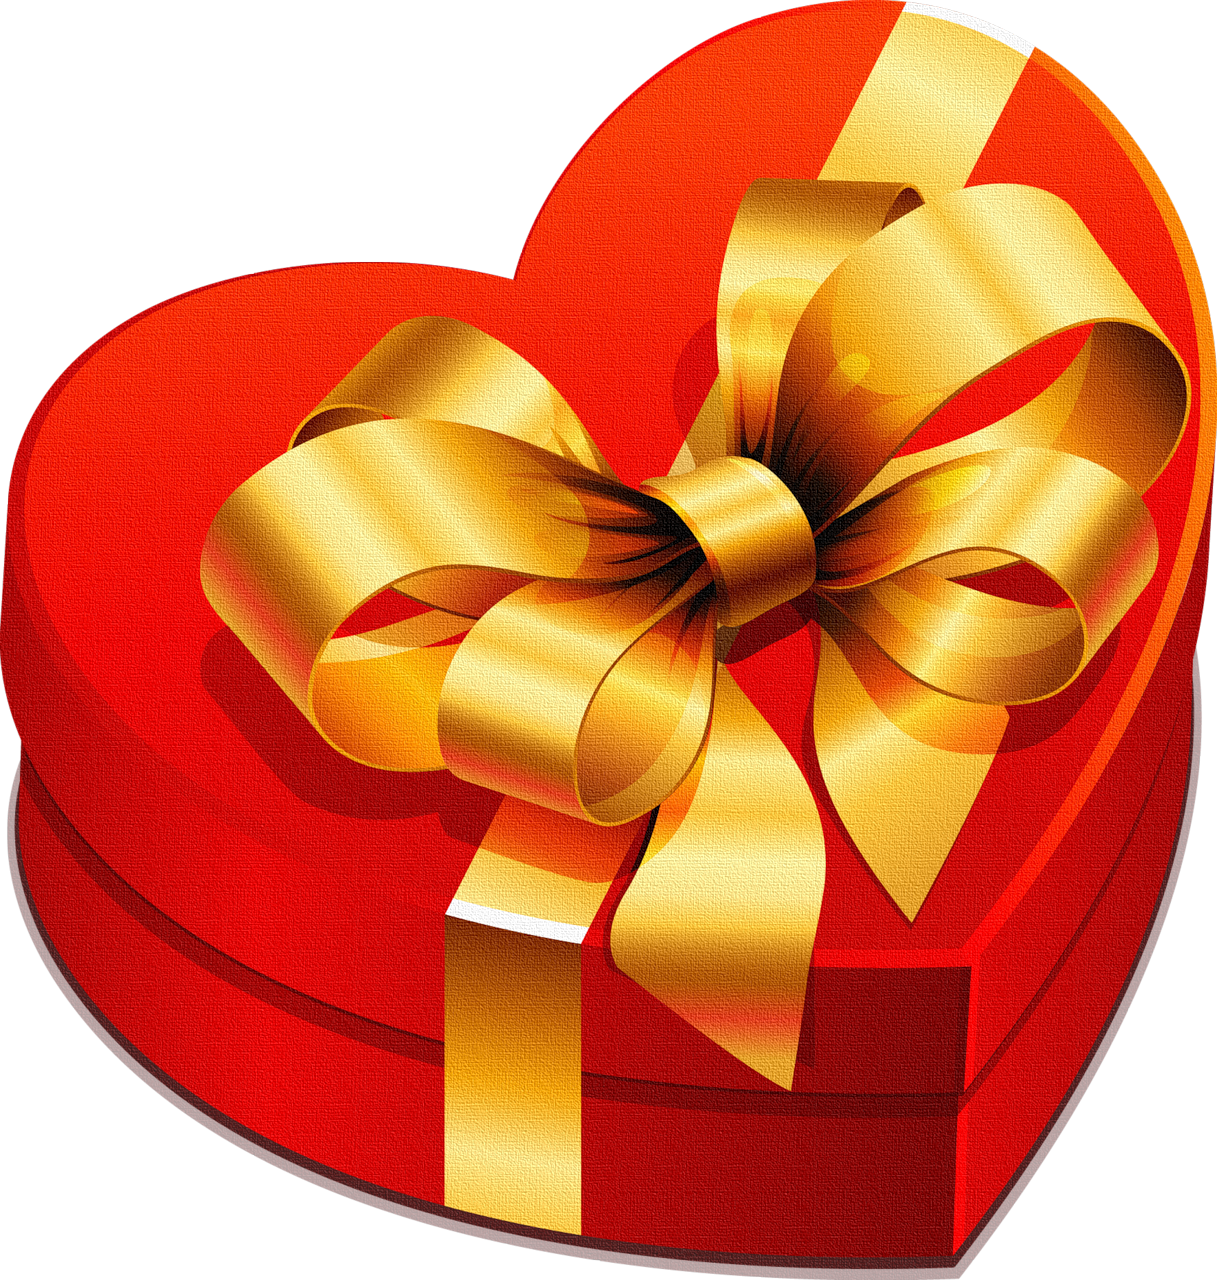 heart gift box PNG image transparent image download, size: 1217x1280px